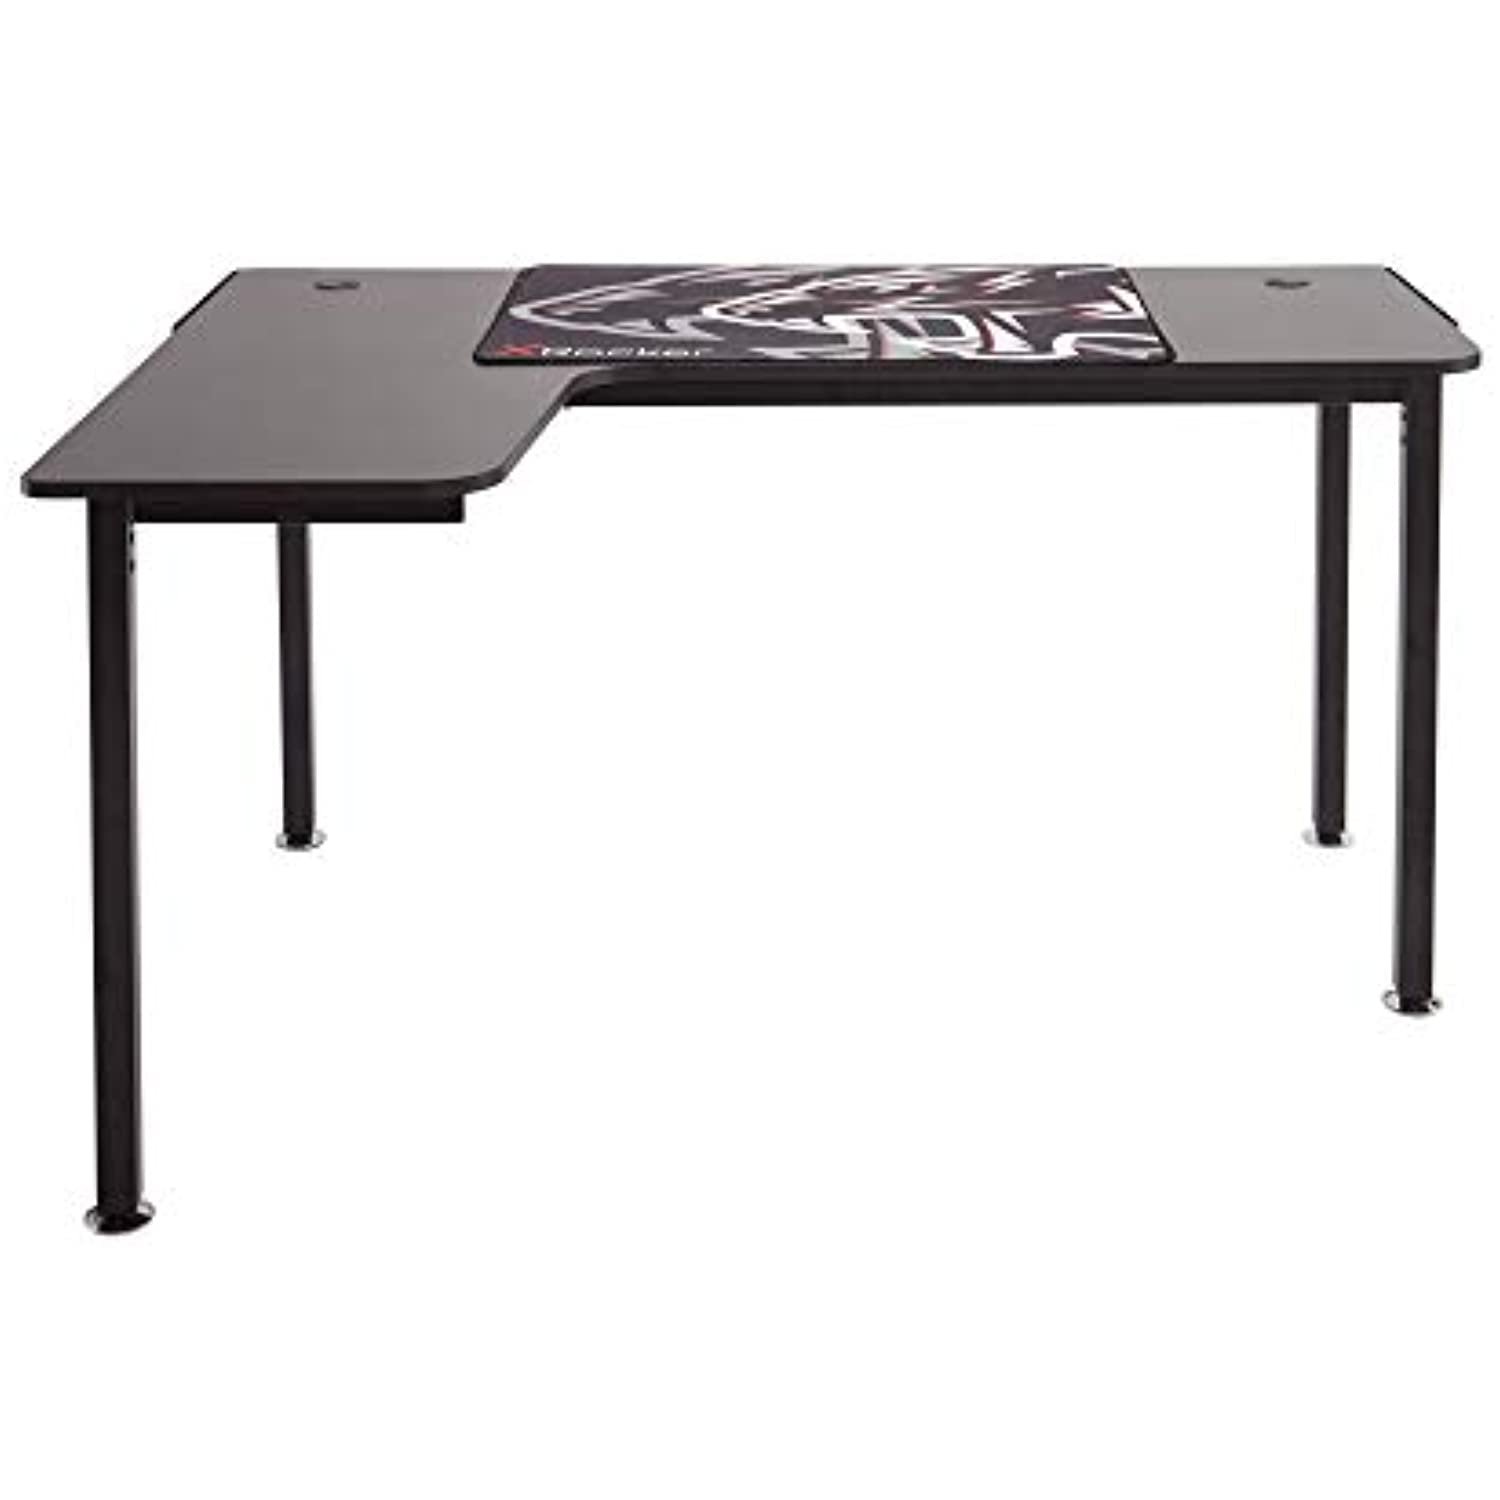 X Rocker Panther XL Left Corner Gaming Desk with Free Large Mousepad Included Ultra Wide Left-Hand Corner Computer Table Grey Carbon Fibre Effect and Cable Management 